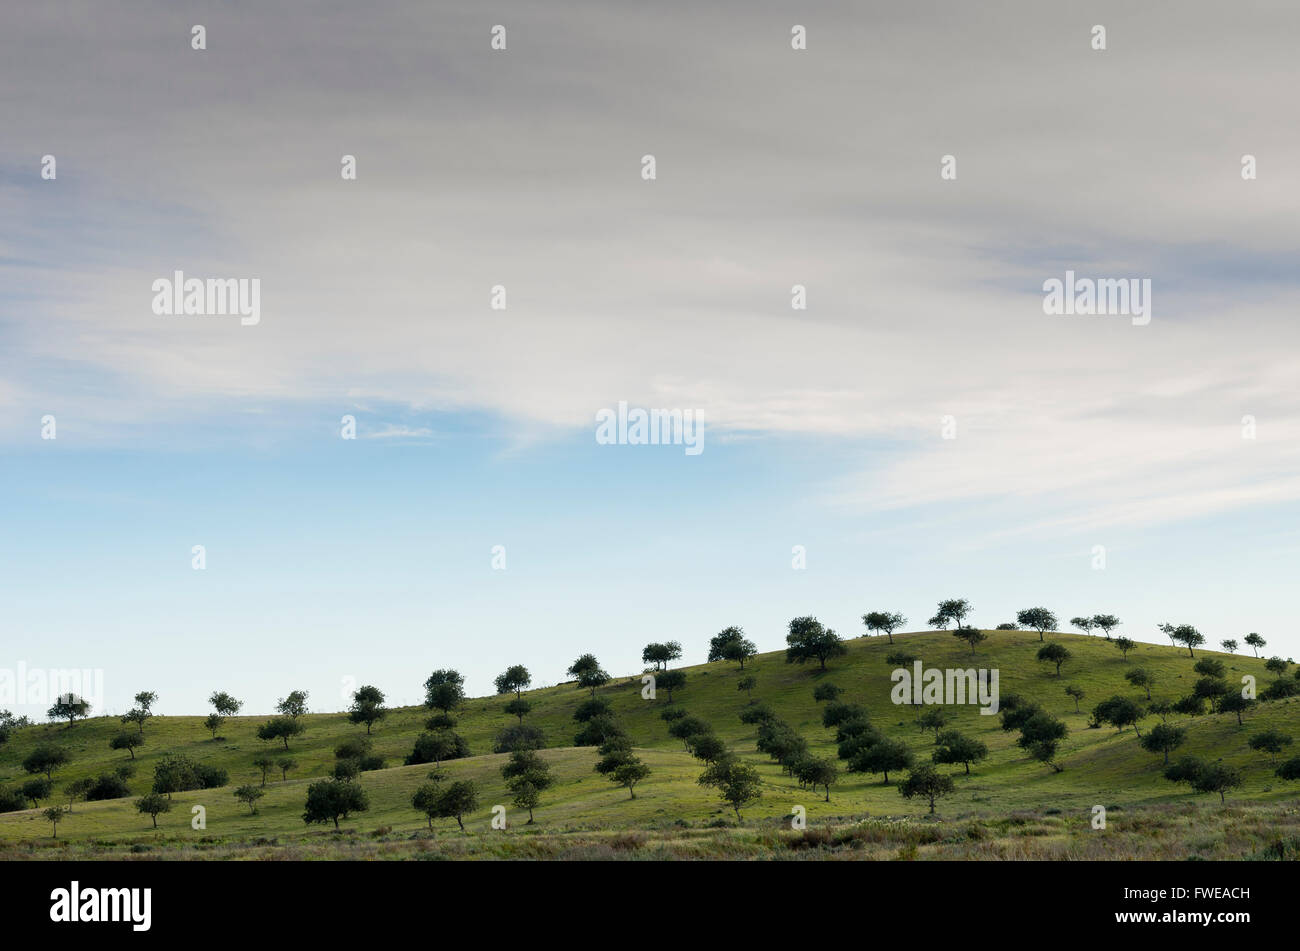 Cultivated trees in Portugal Stock Photo